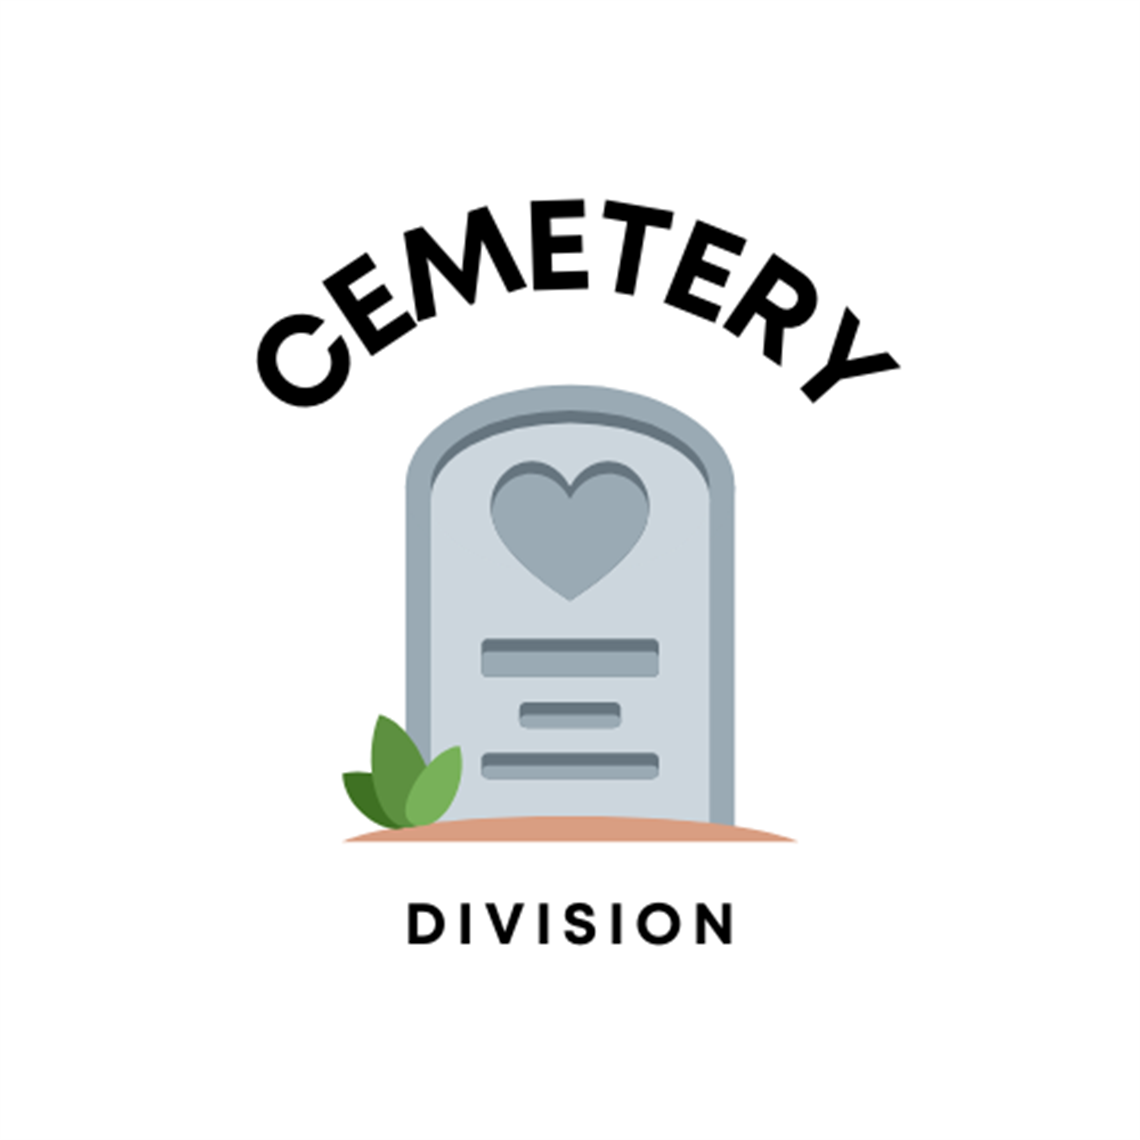 Cemetery Division logo.png